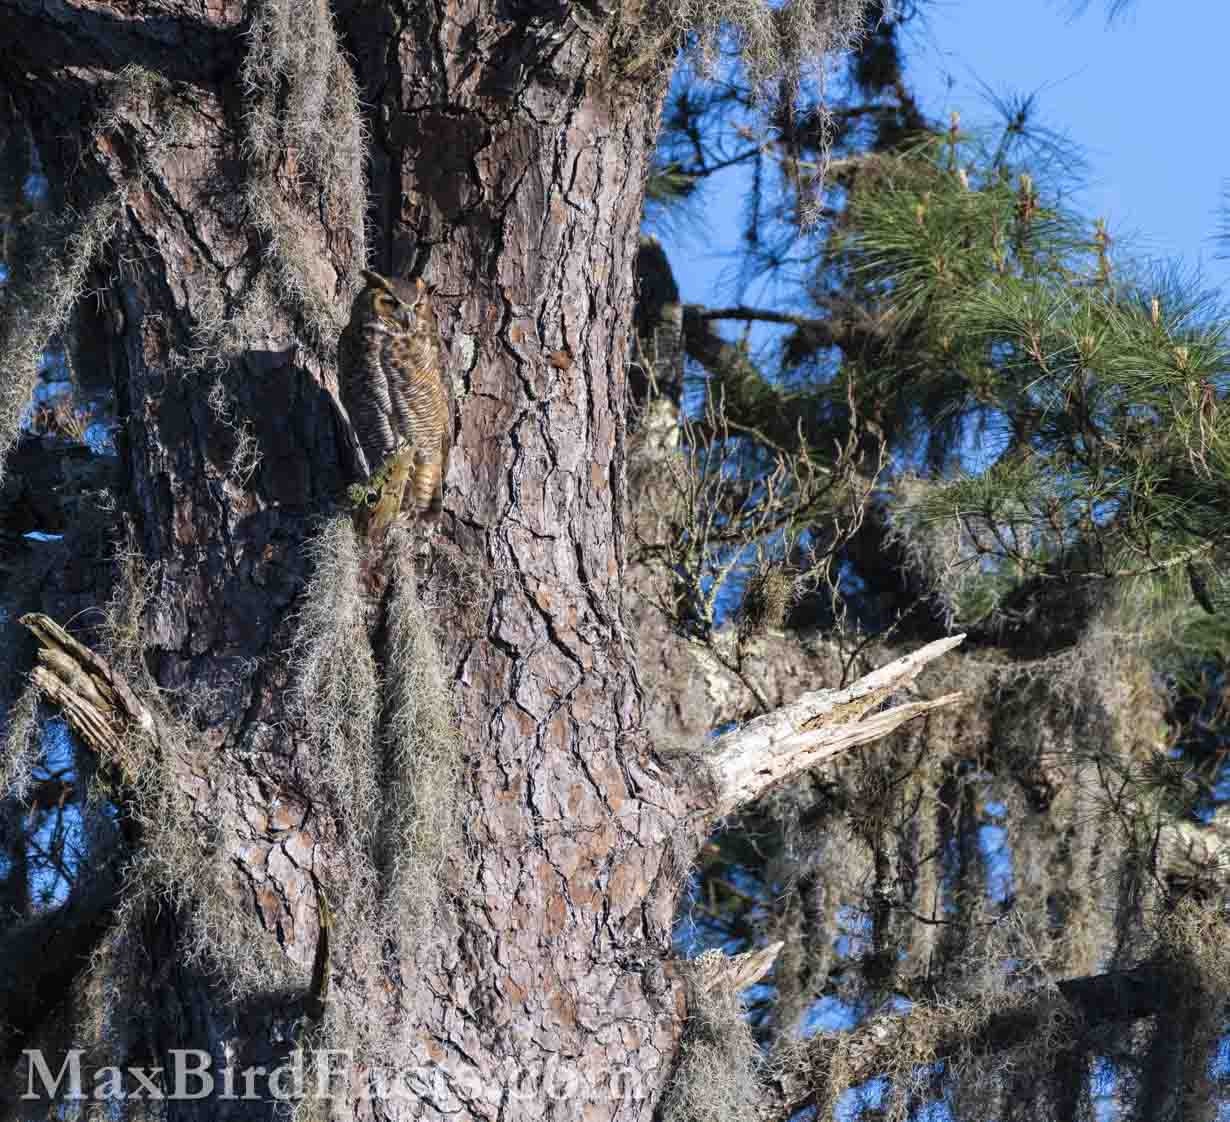 Can you spot the Great Horned Owl (Bubo virginianus) in this image? This species' camouflage is remarkable, even when perched in direct sunlight. (Romeo, FL. 2022)